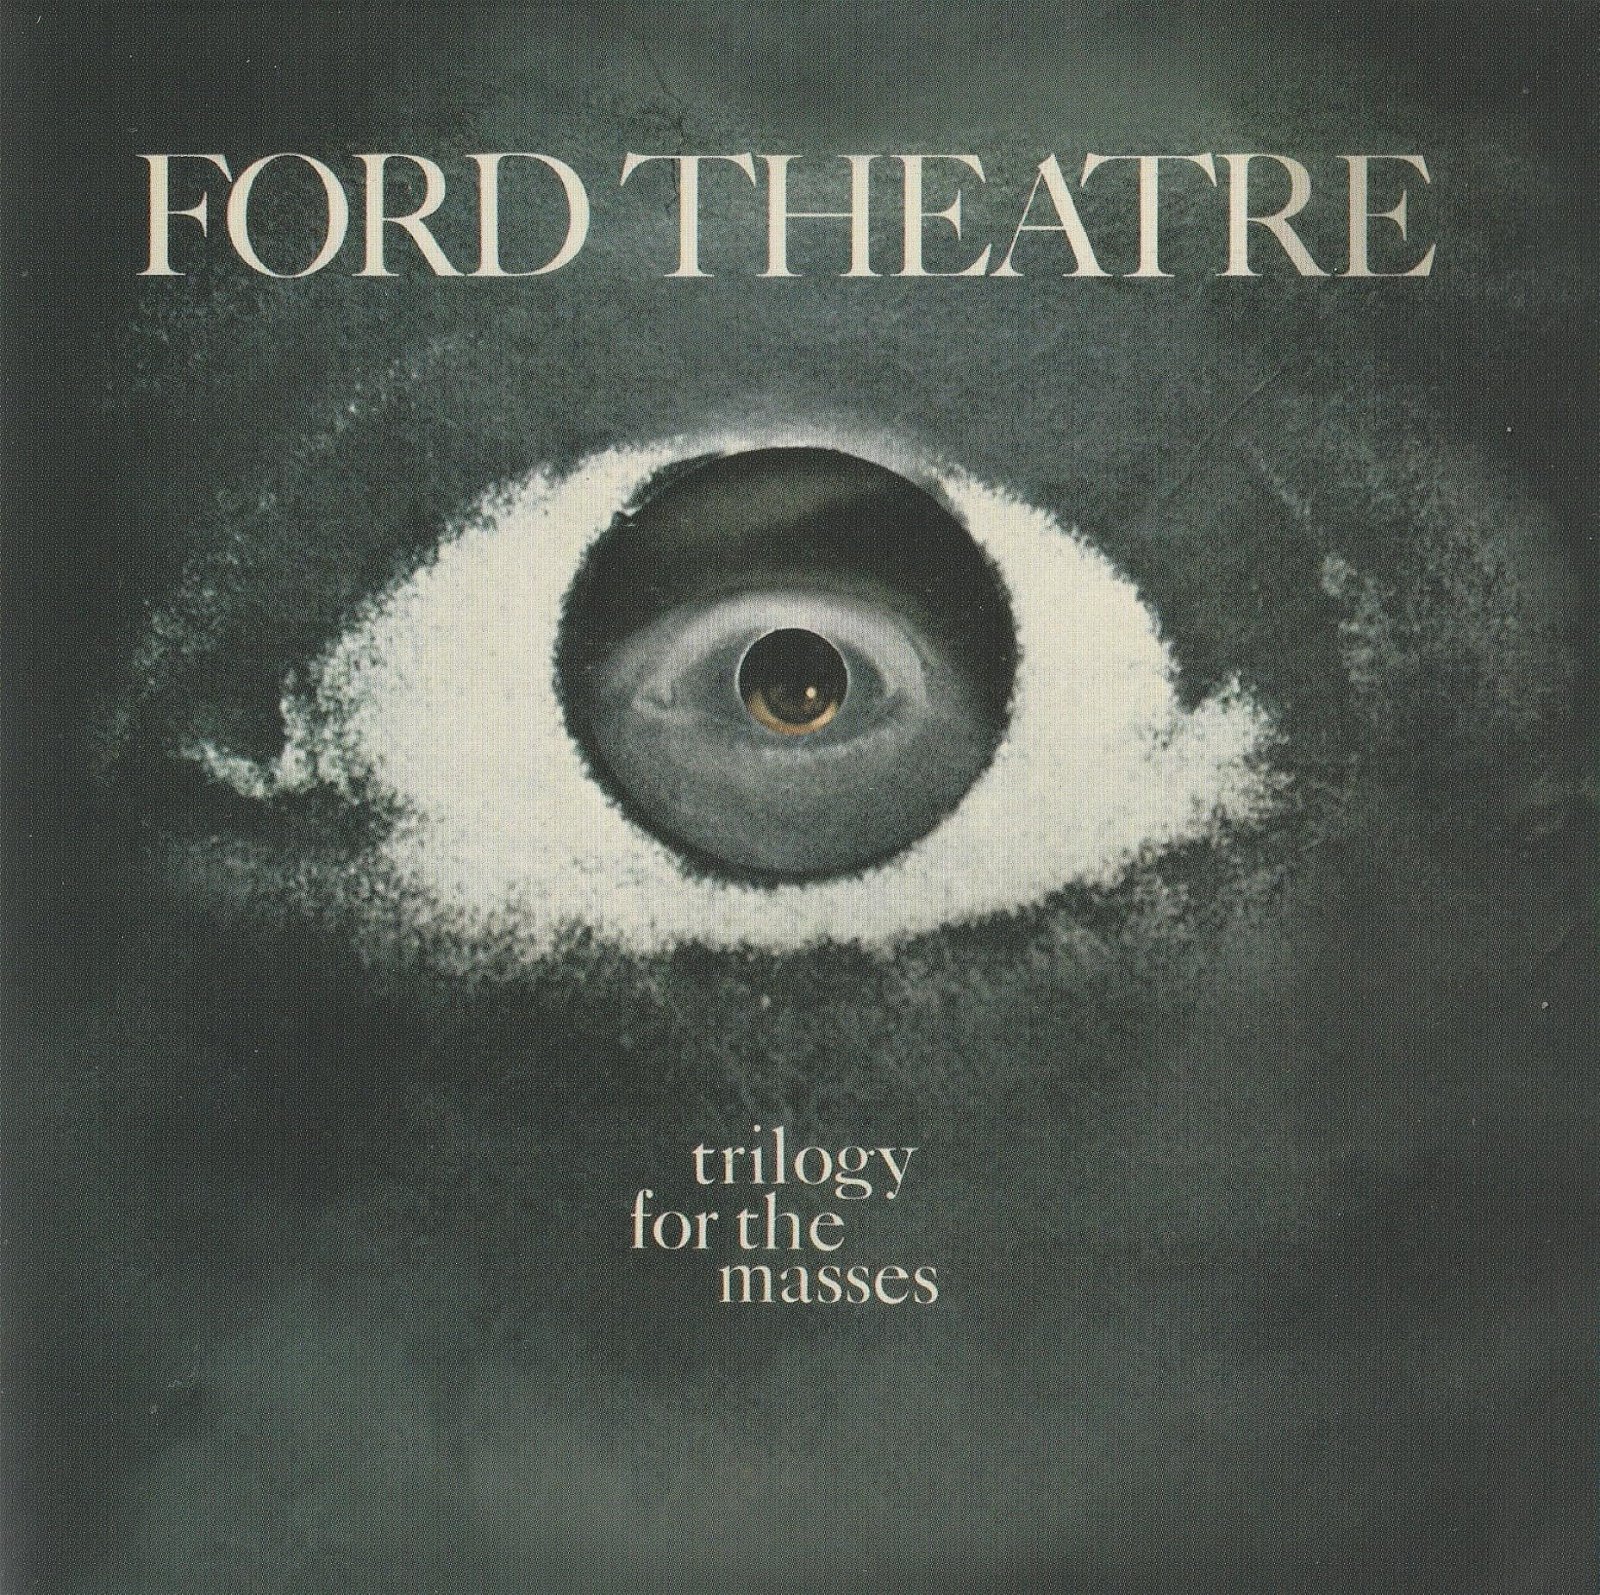 CD Shop - FORD THEATRE TRILOGY FOR THE MASSES